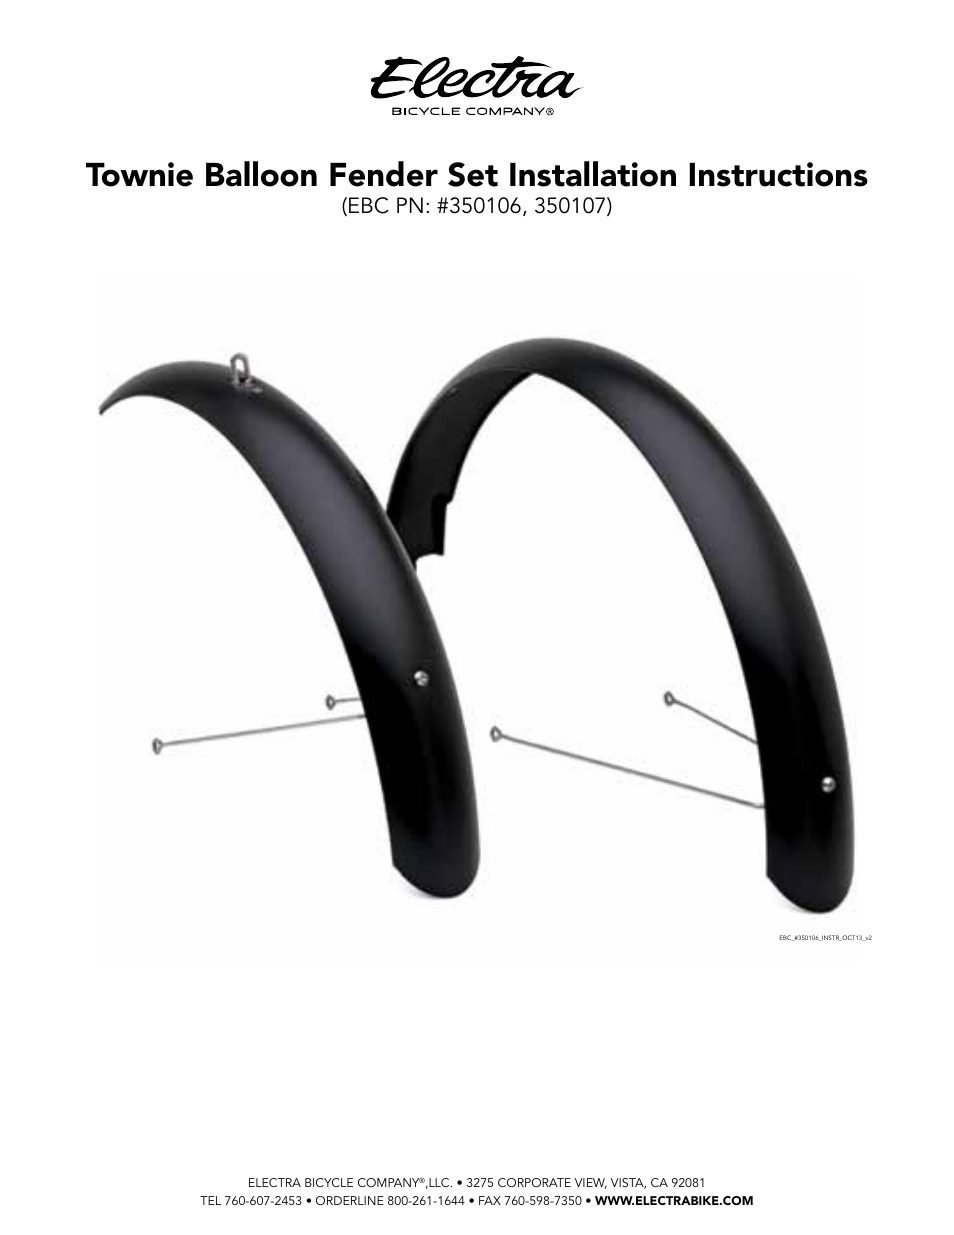 electra townie fender installation instructions